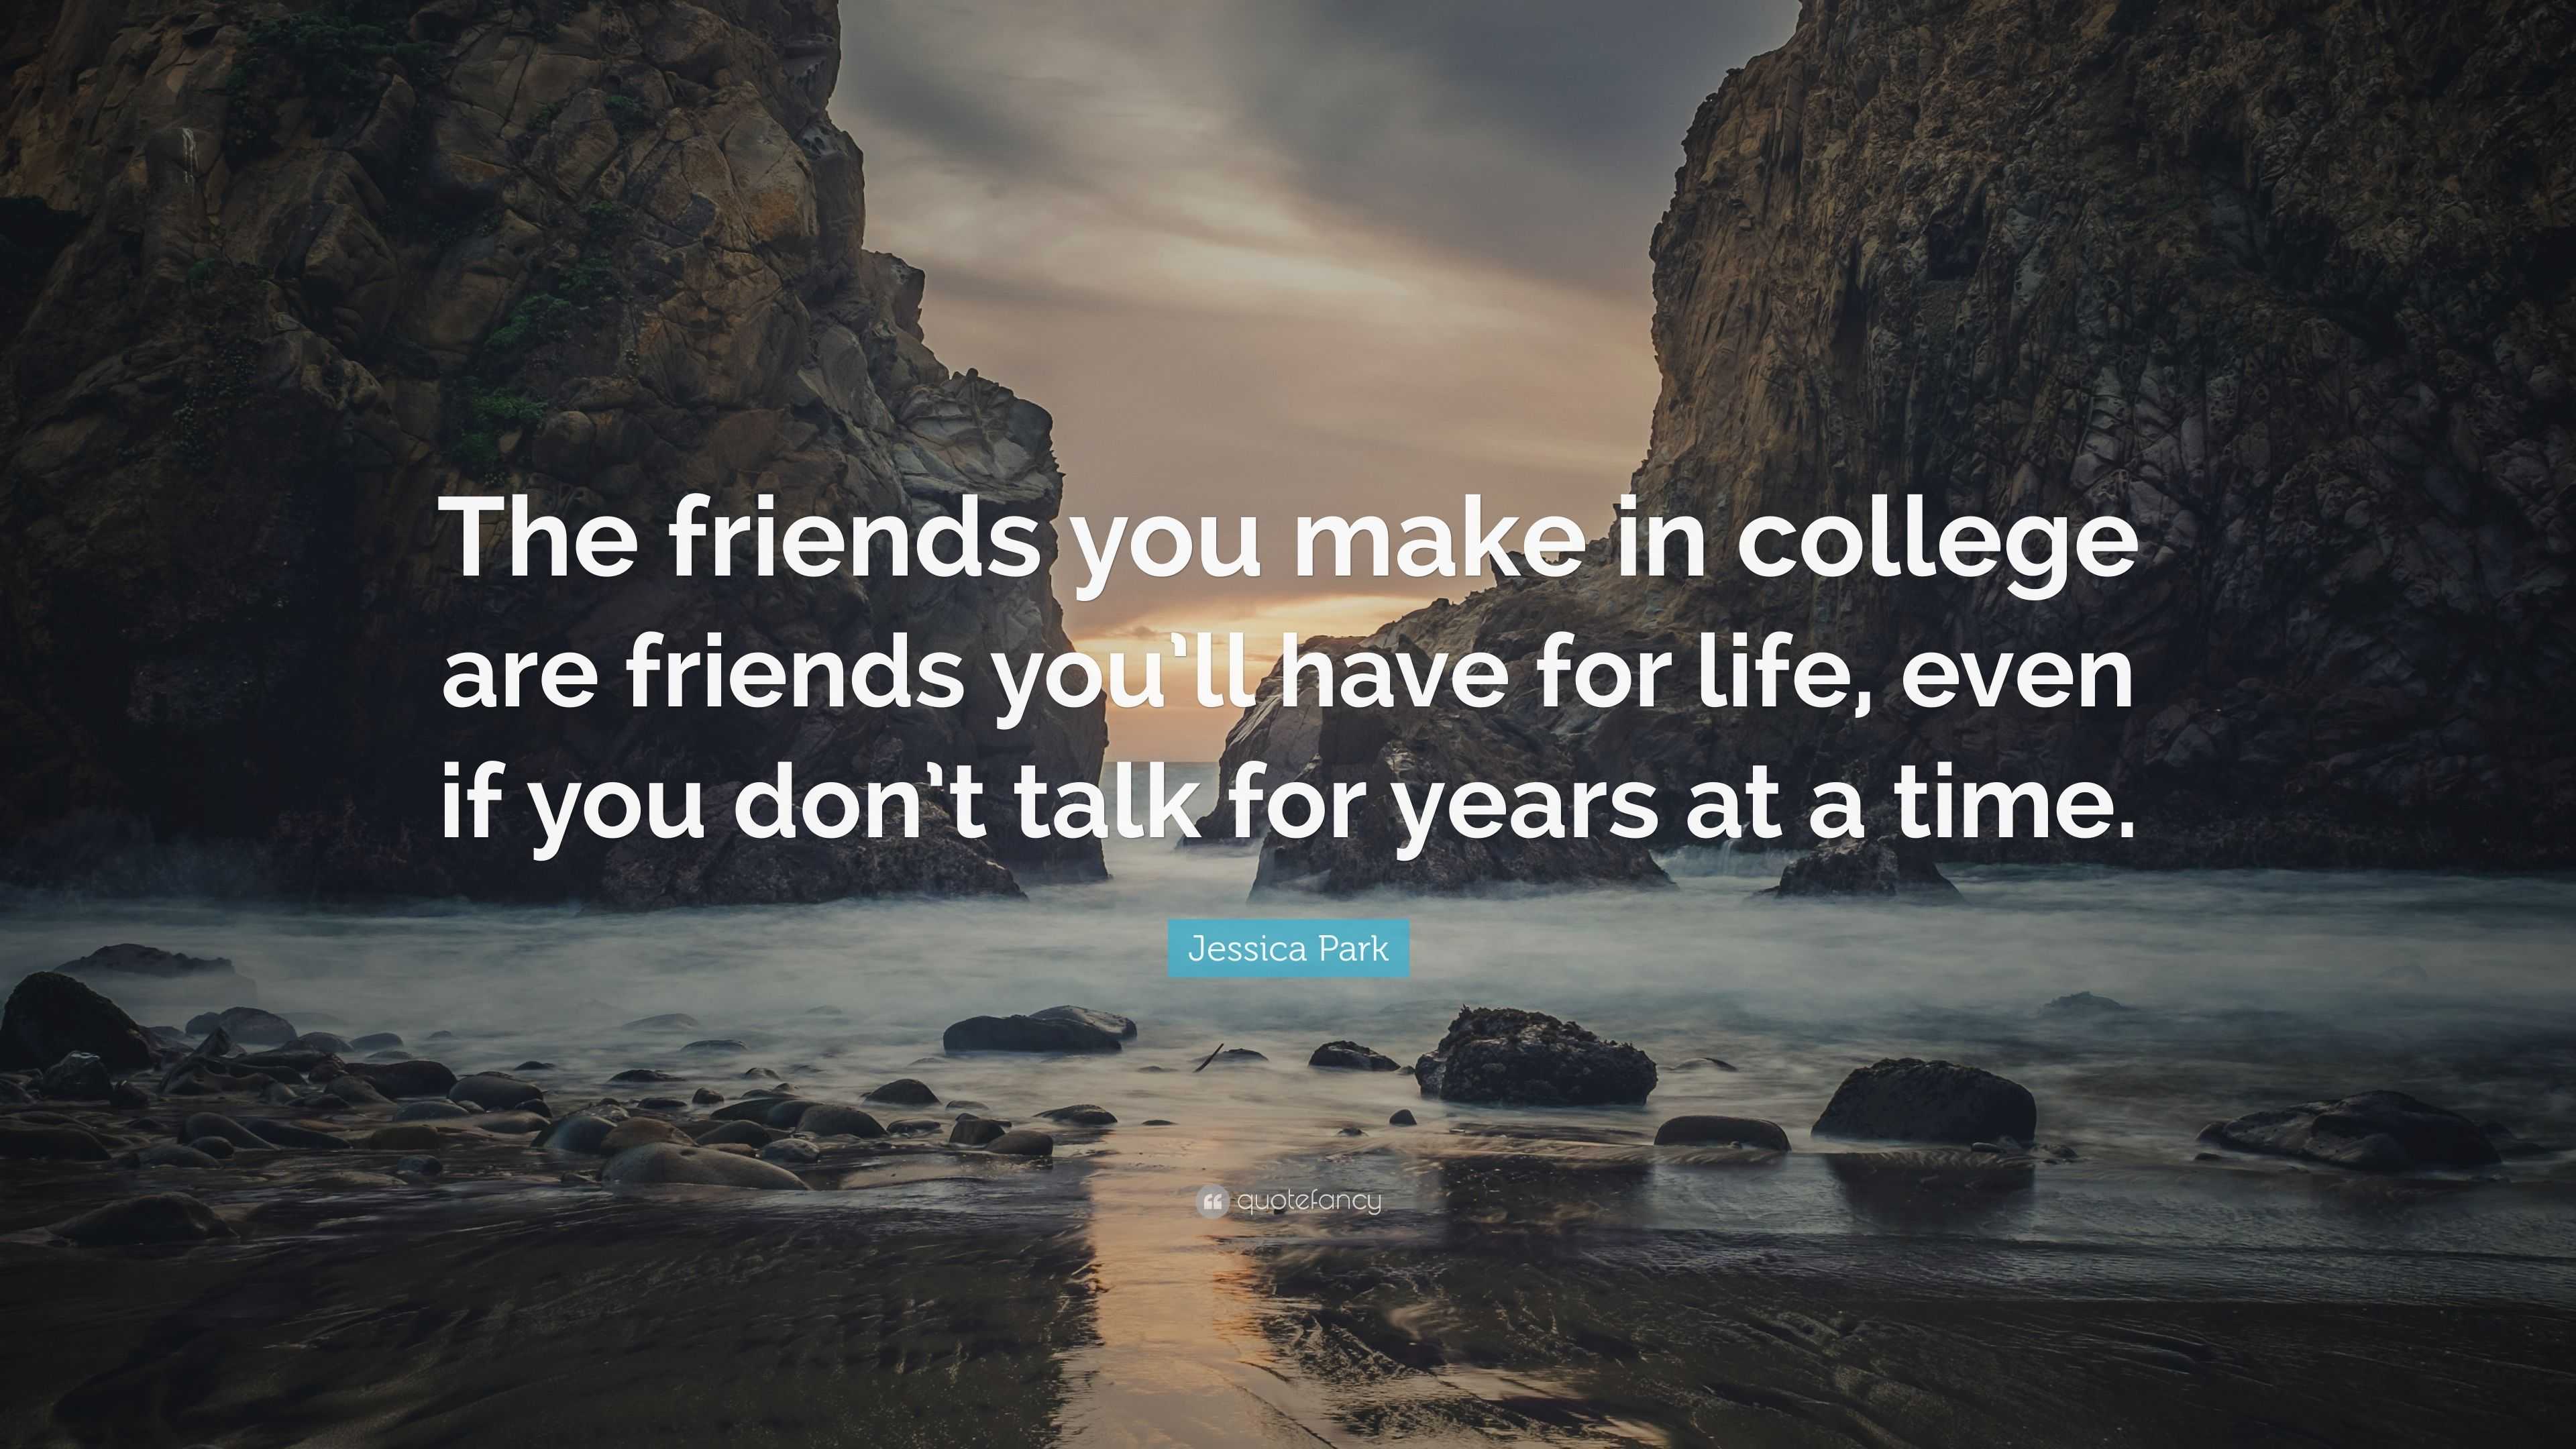 College friends quotes funny